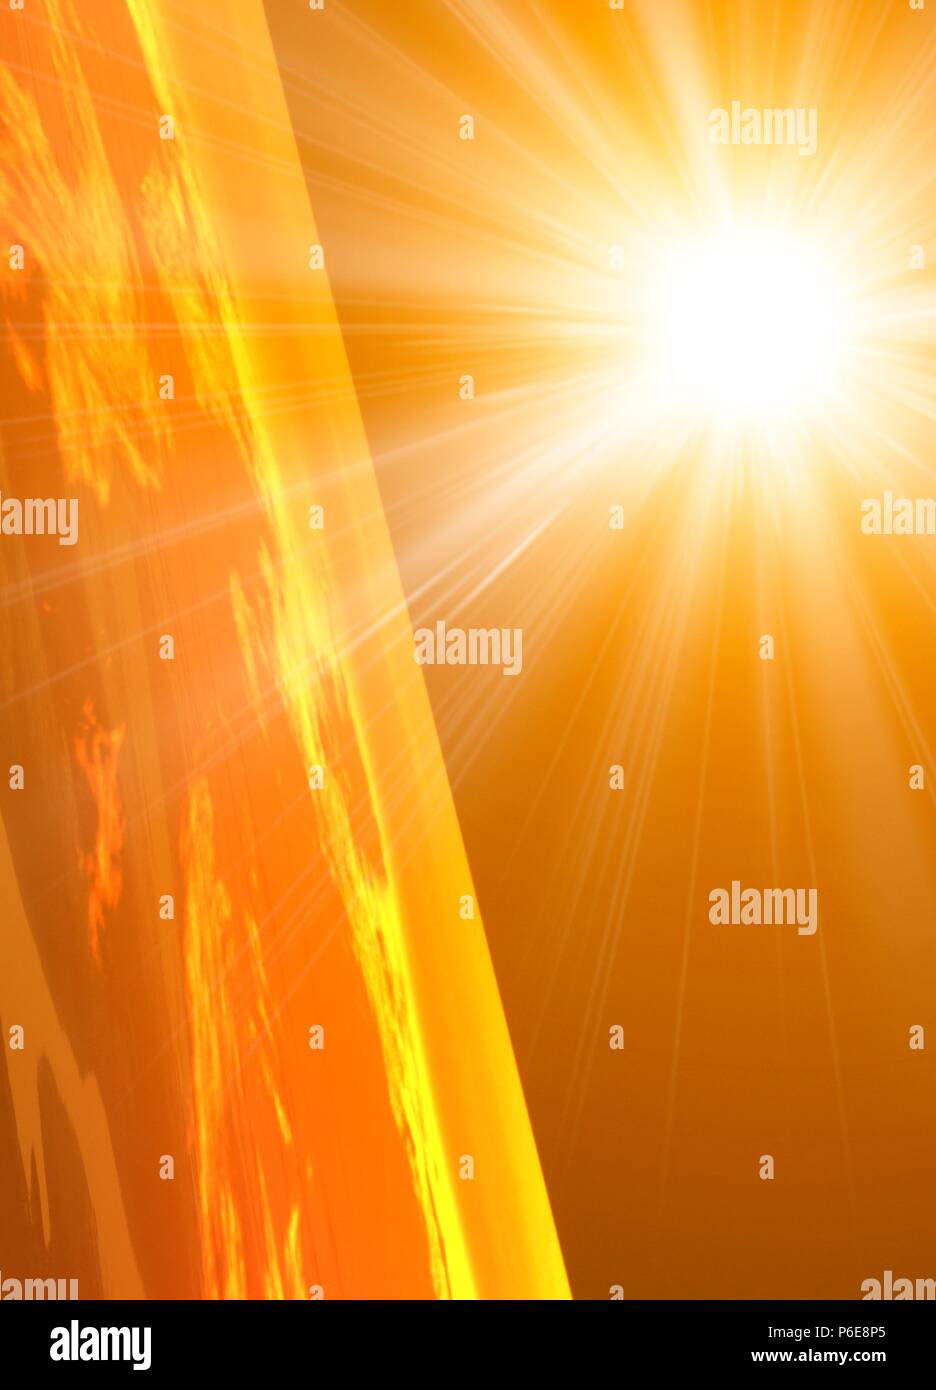 Yellow planets and bright light, illustration. Stock Photo